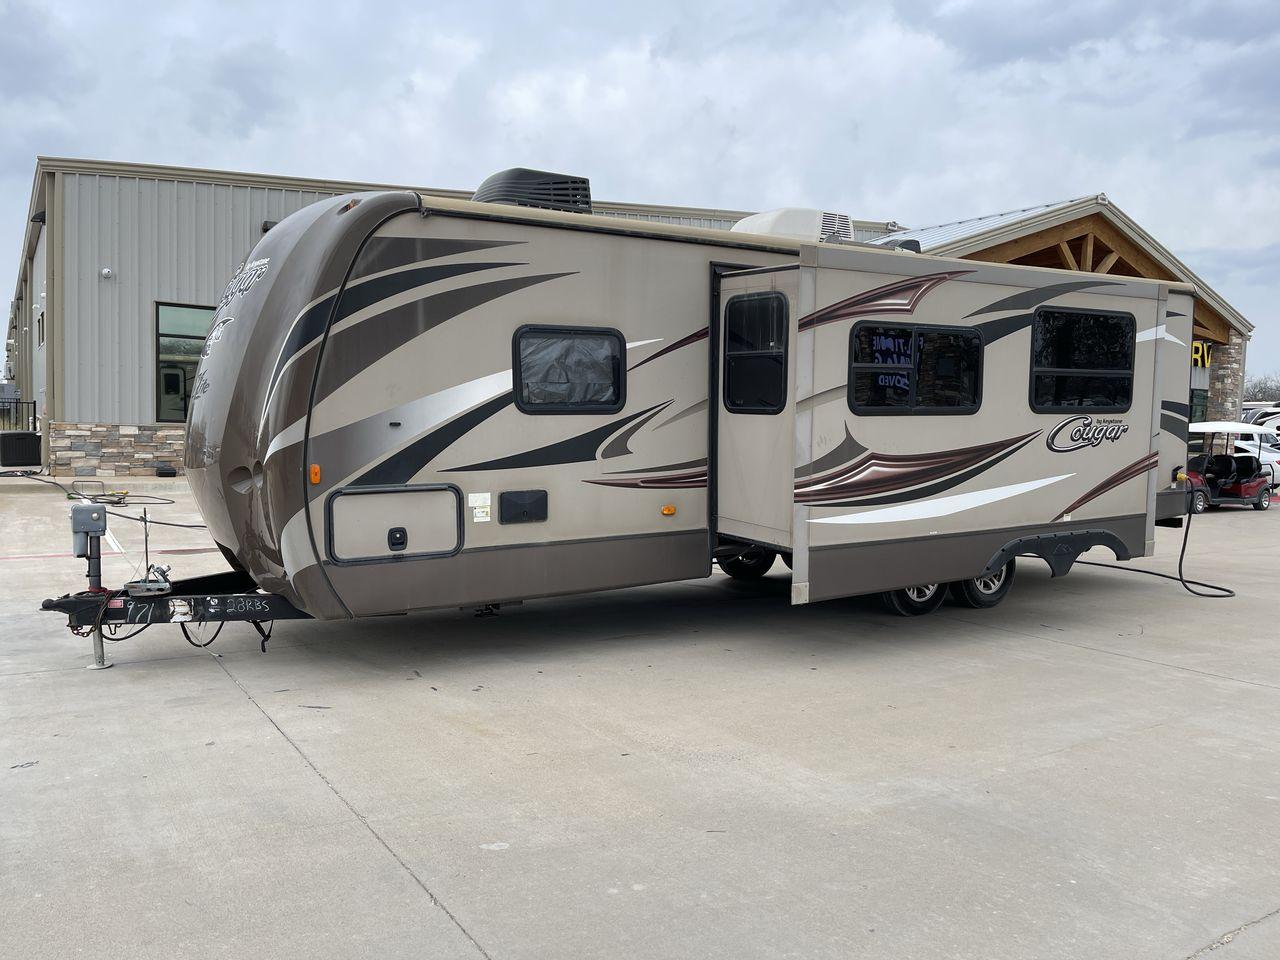 2016 BROWN KEYSTONE COUGAR 28RBS - (4YDT28R23GV) , Length: 32.17 ft. | Dry Weight: 6,115 lbs. | Gross Weight: 8,200 lbs. | Slides: 1 transmission, located at 4319 N Main St, Cleburne, TX, 76033, (817) 678-5133, 32.385960, -97.391212 - Photo #23